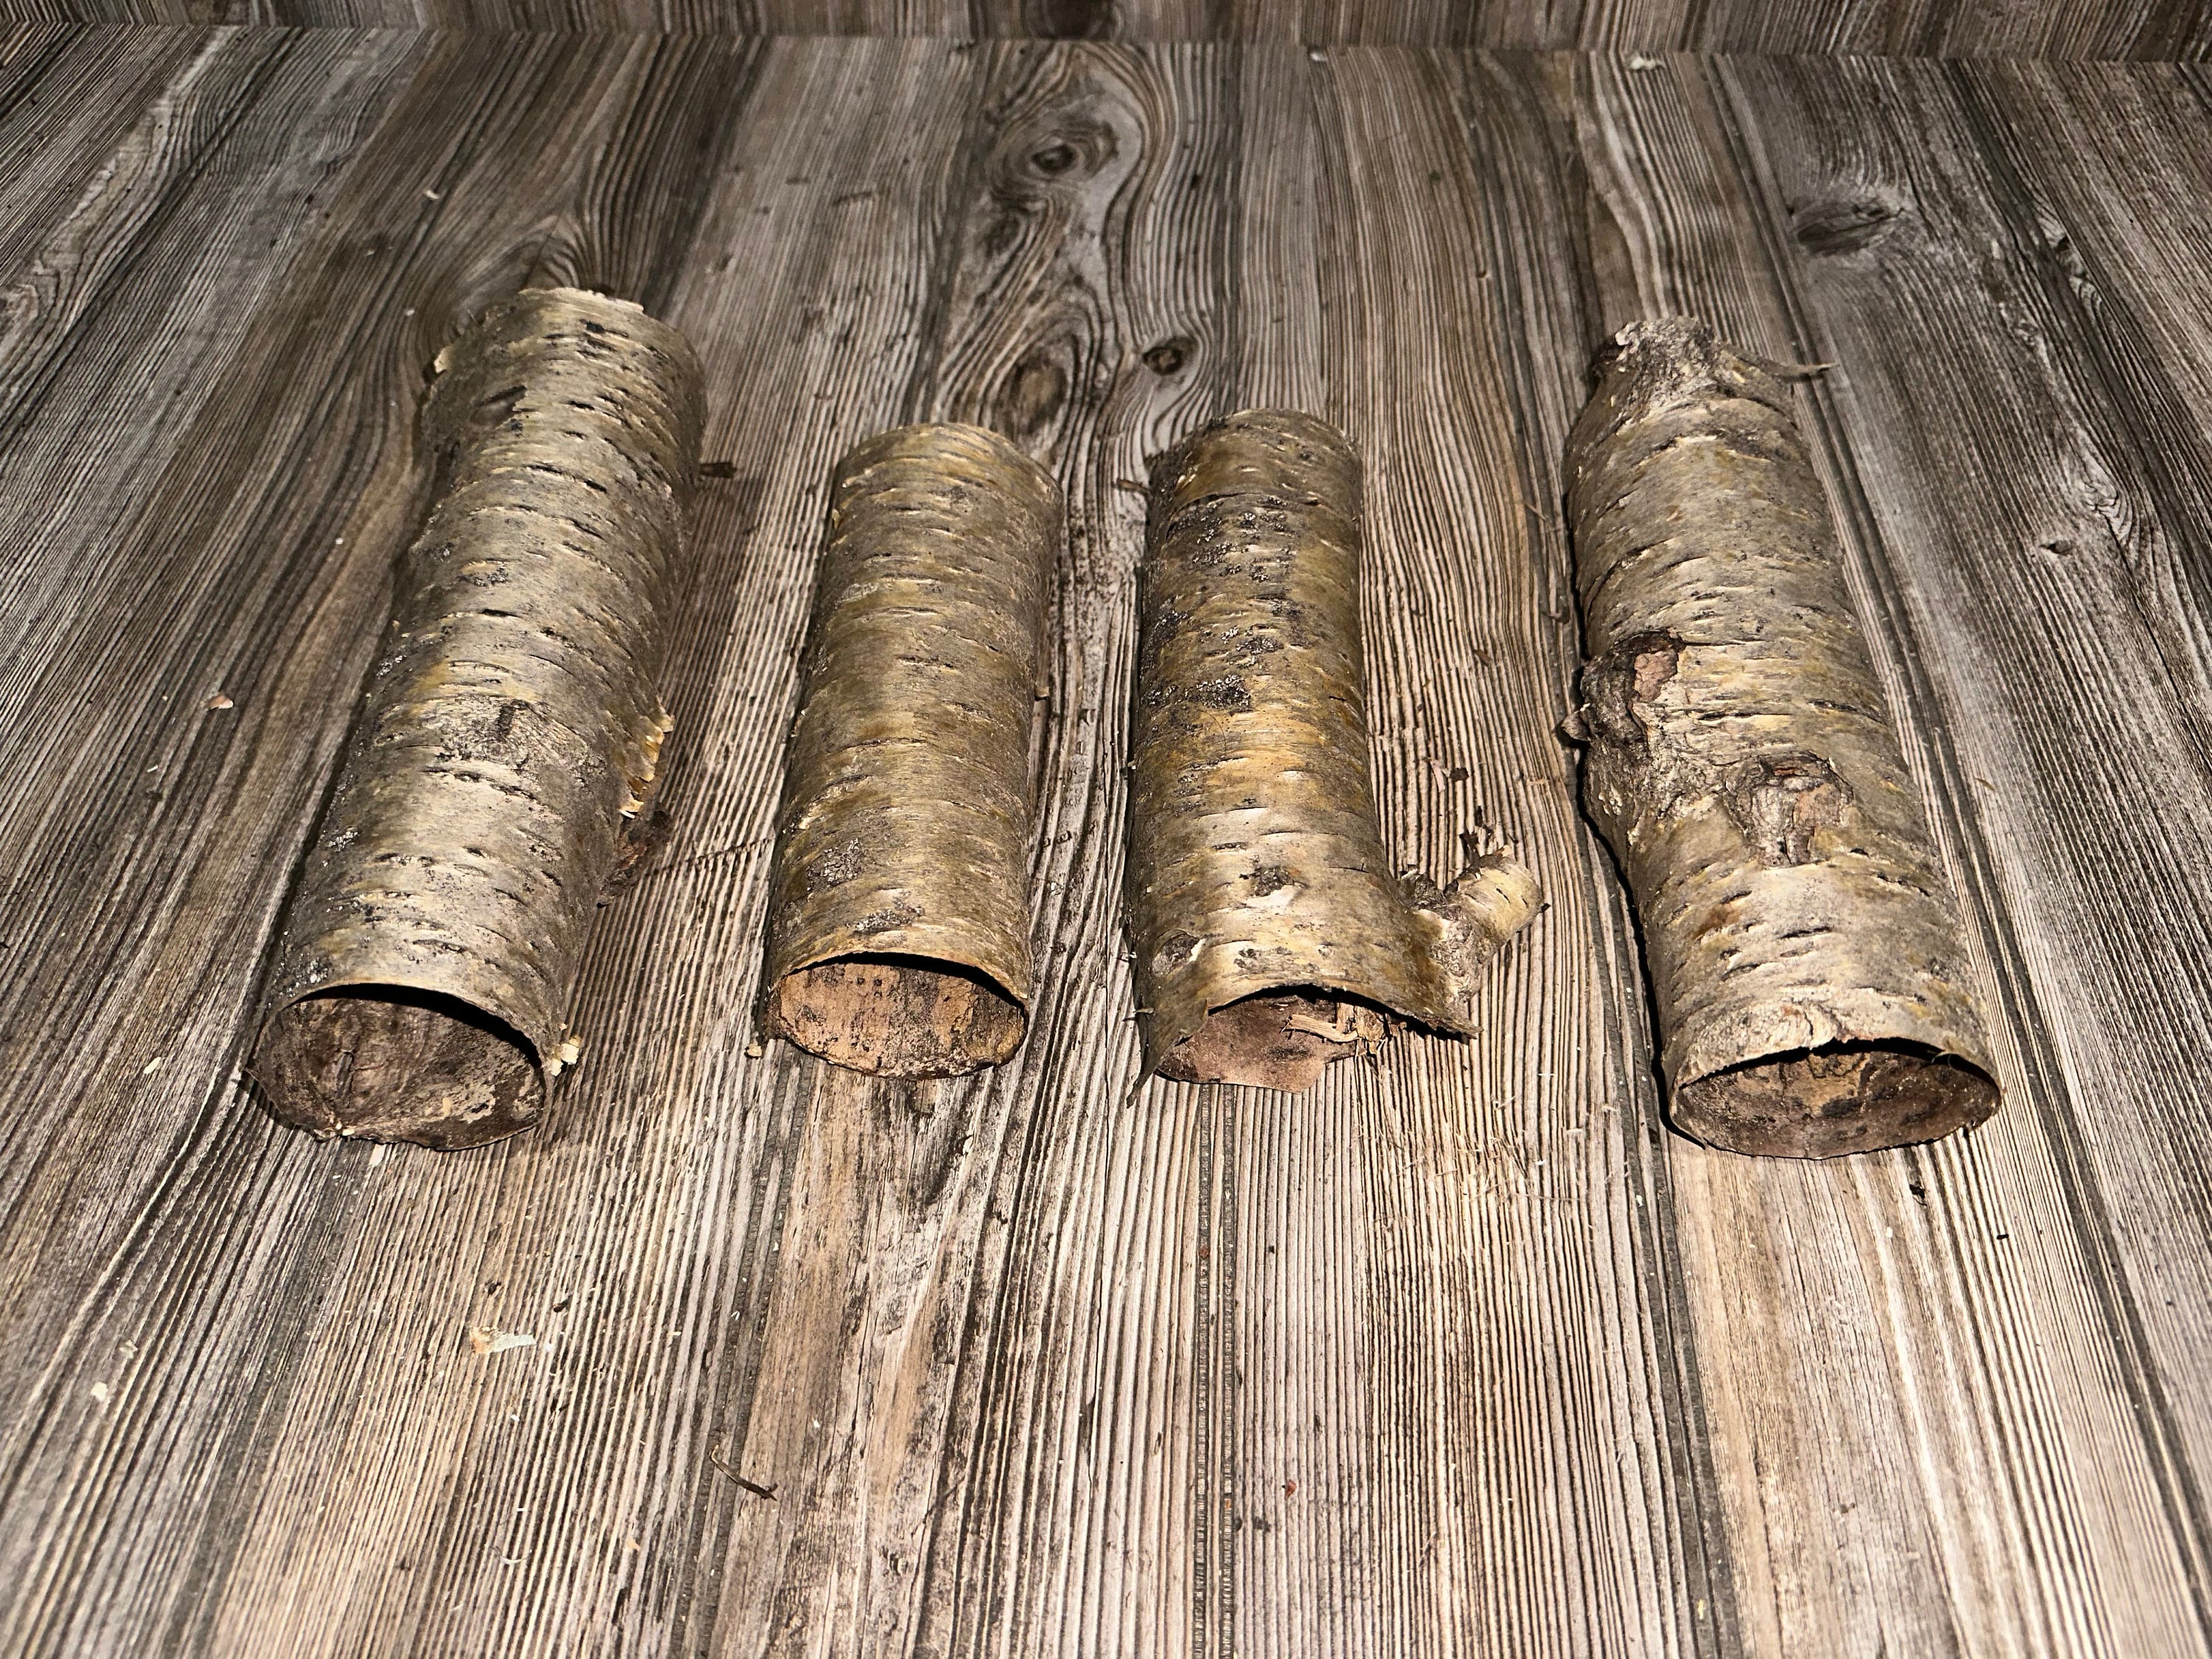 Yellow Birch Bark Tubes, 4 Golden Brown Tubes, Approx 7-9 Inches Long by 2-3 Inches Wide